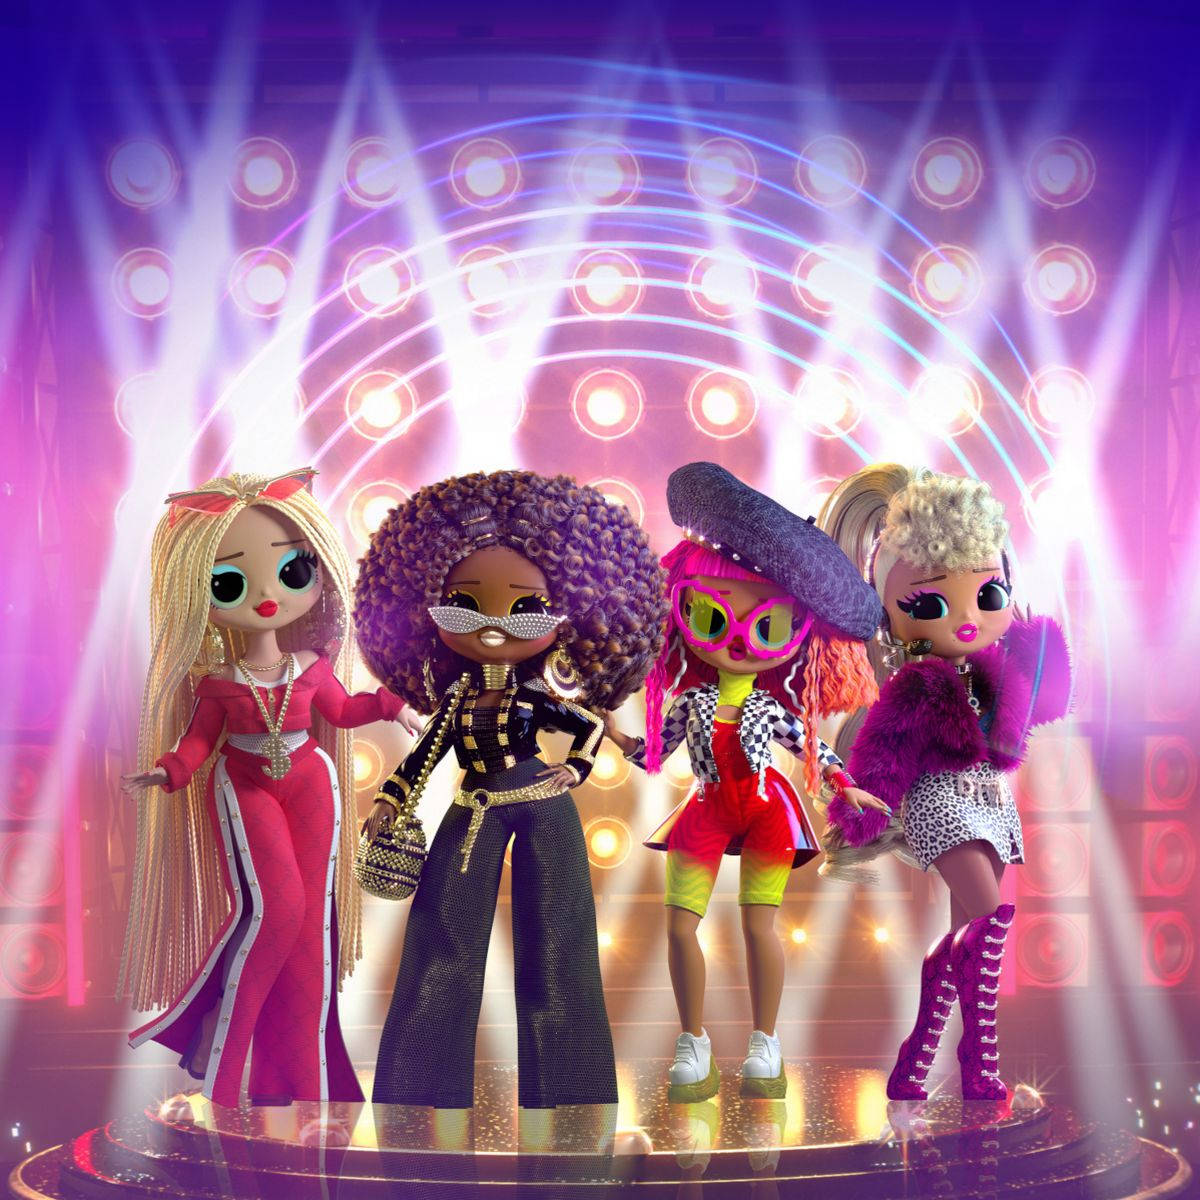 Fabulous Lol Dolls On Stage Background